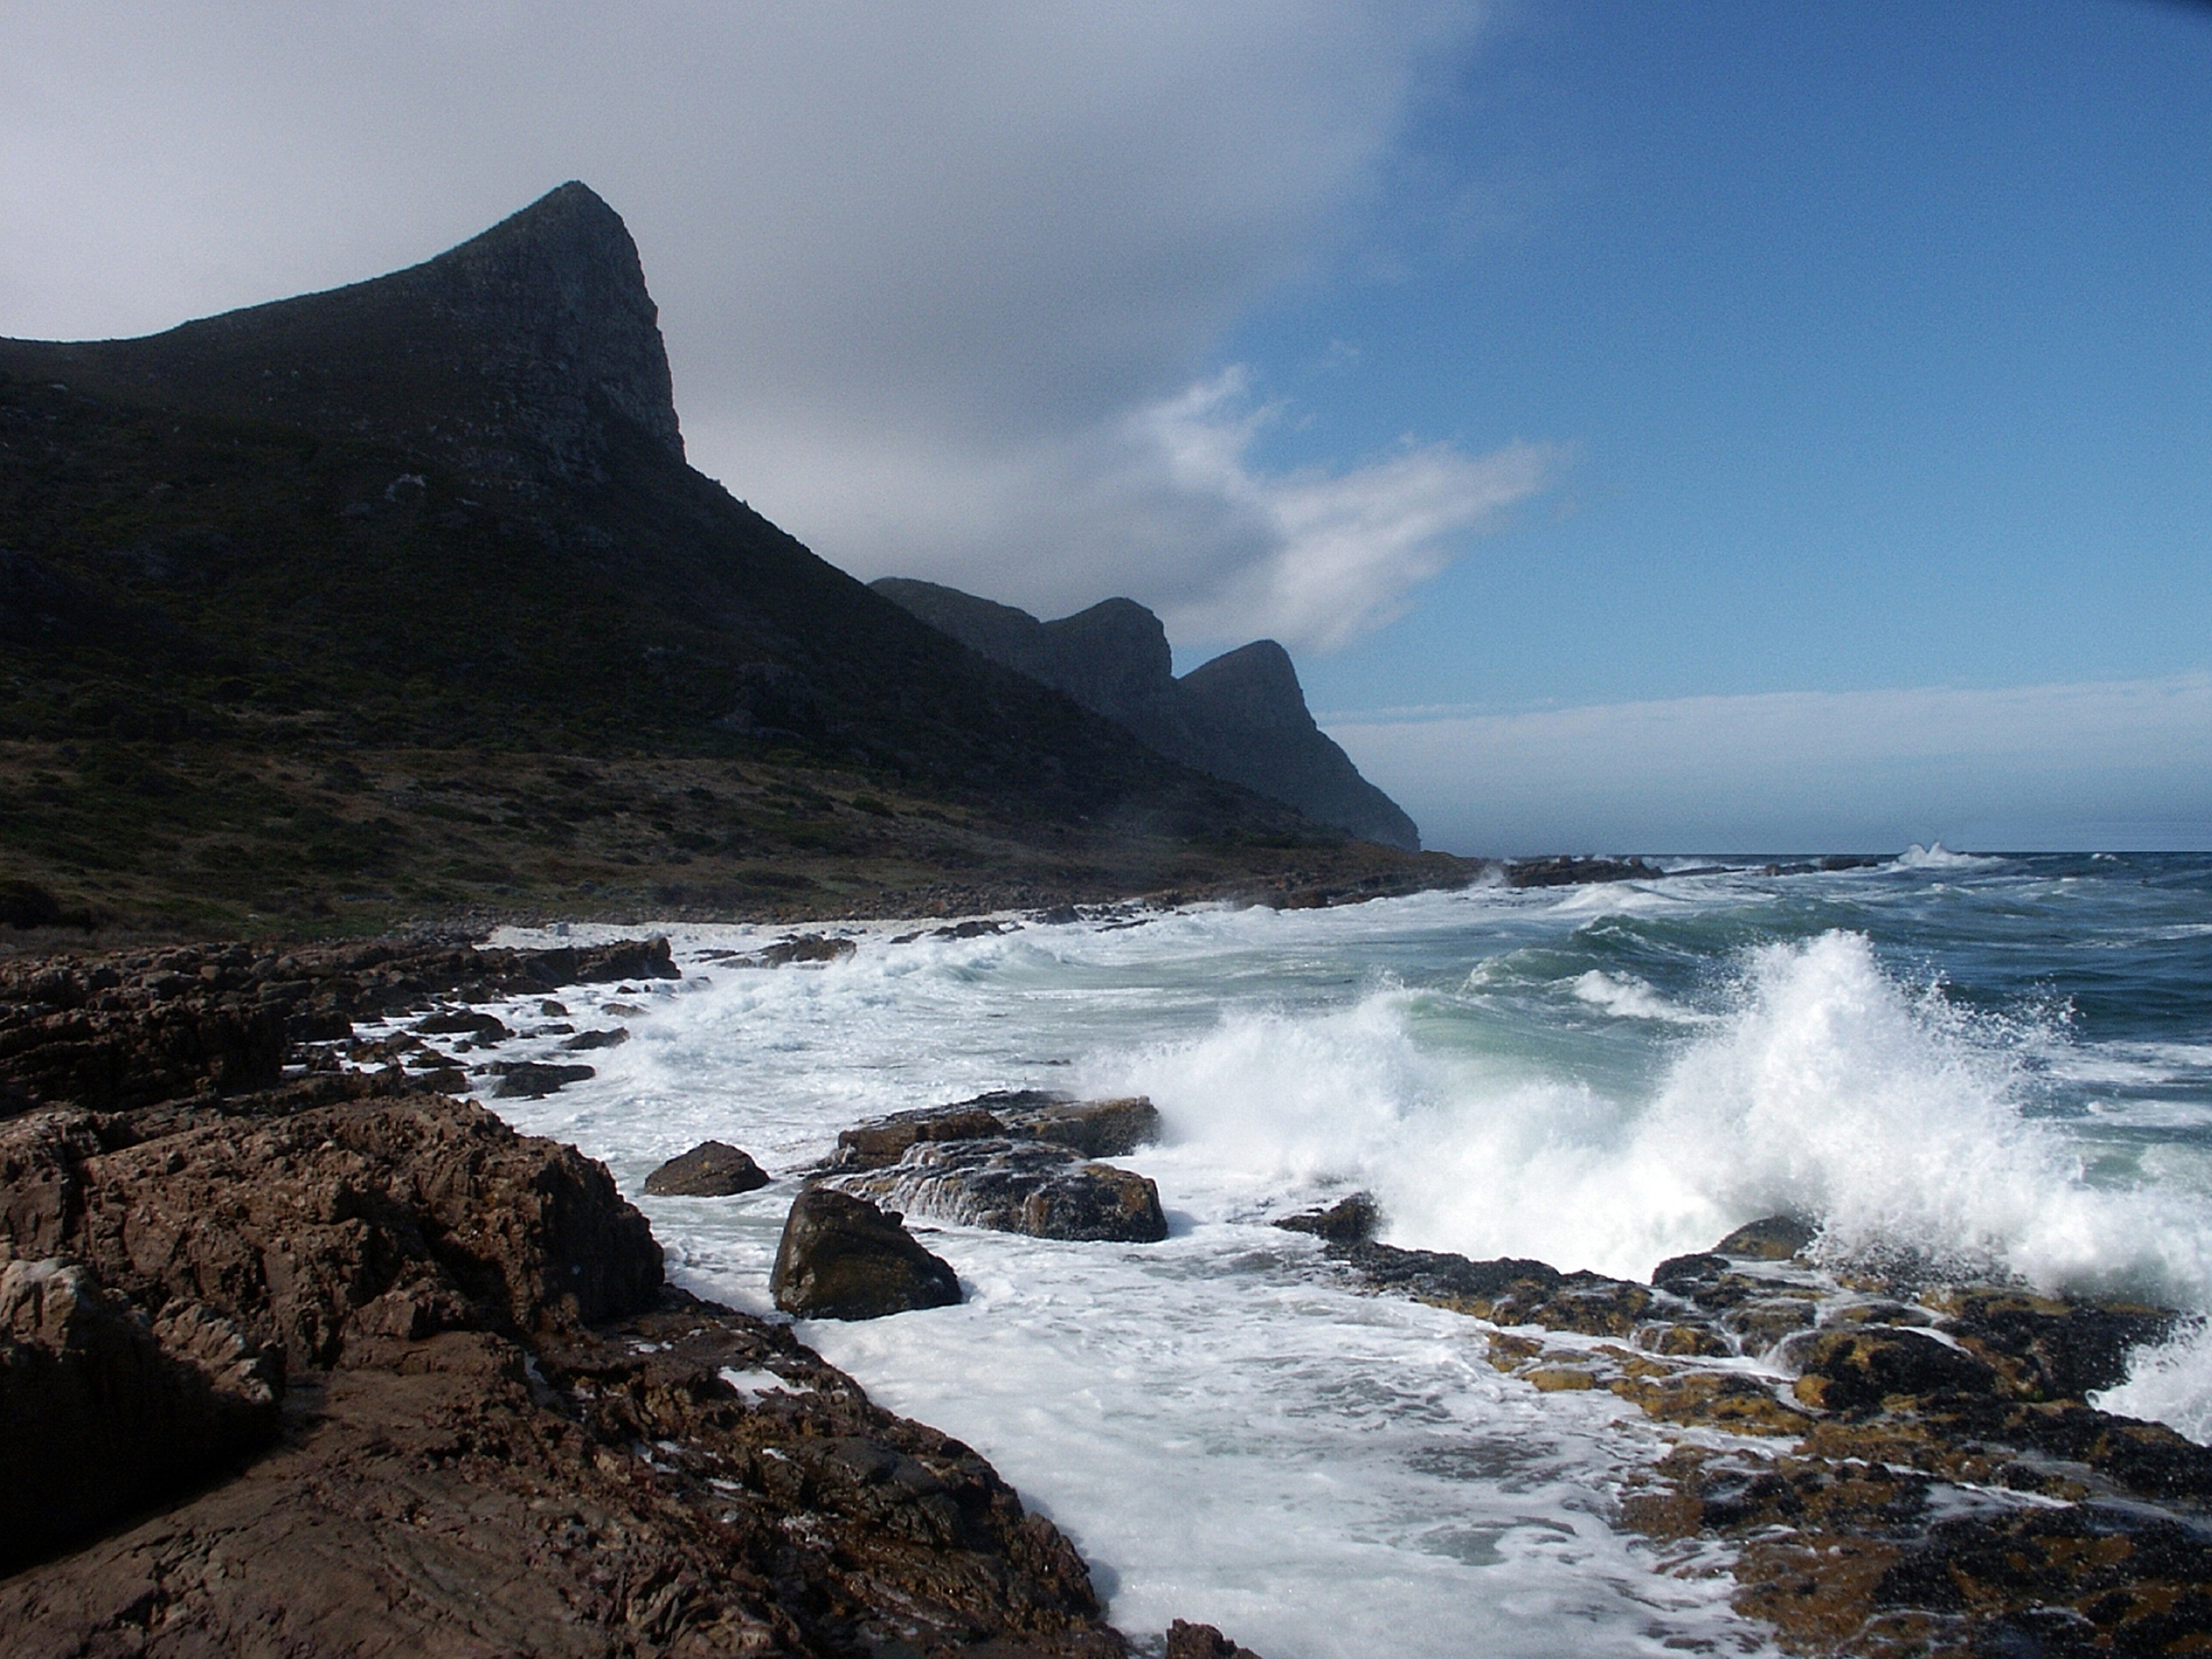 South Africa, Cape Point, Western Cape, outdoors, nature